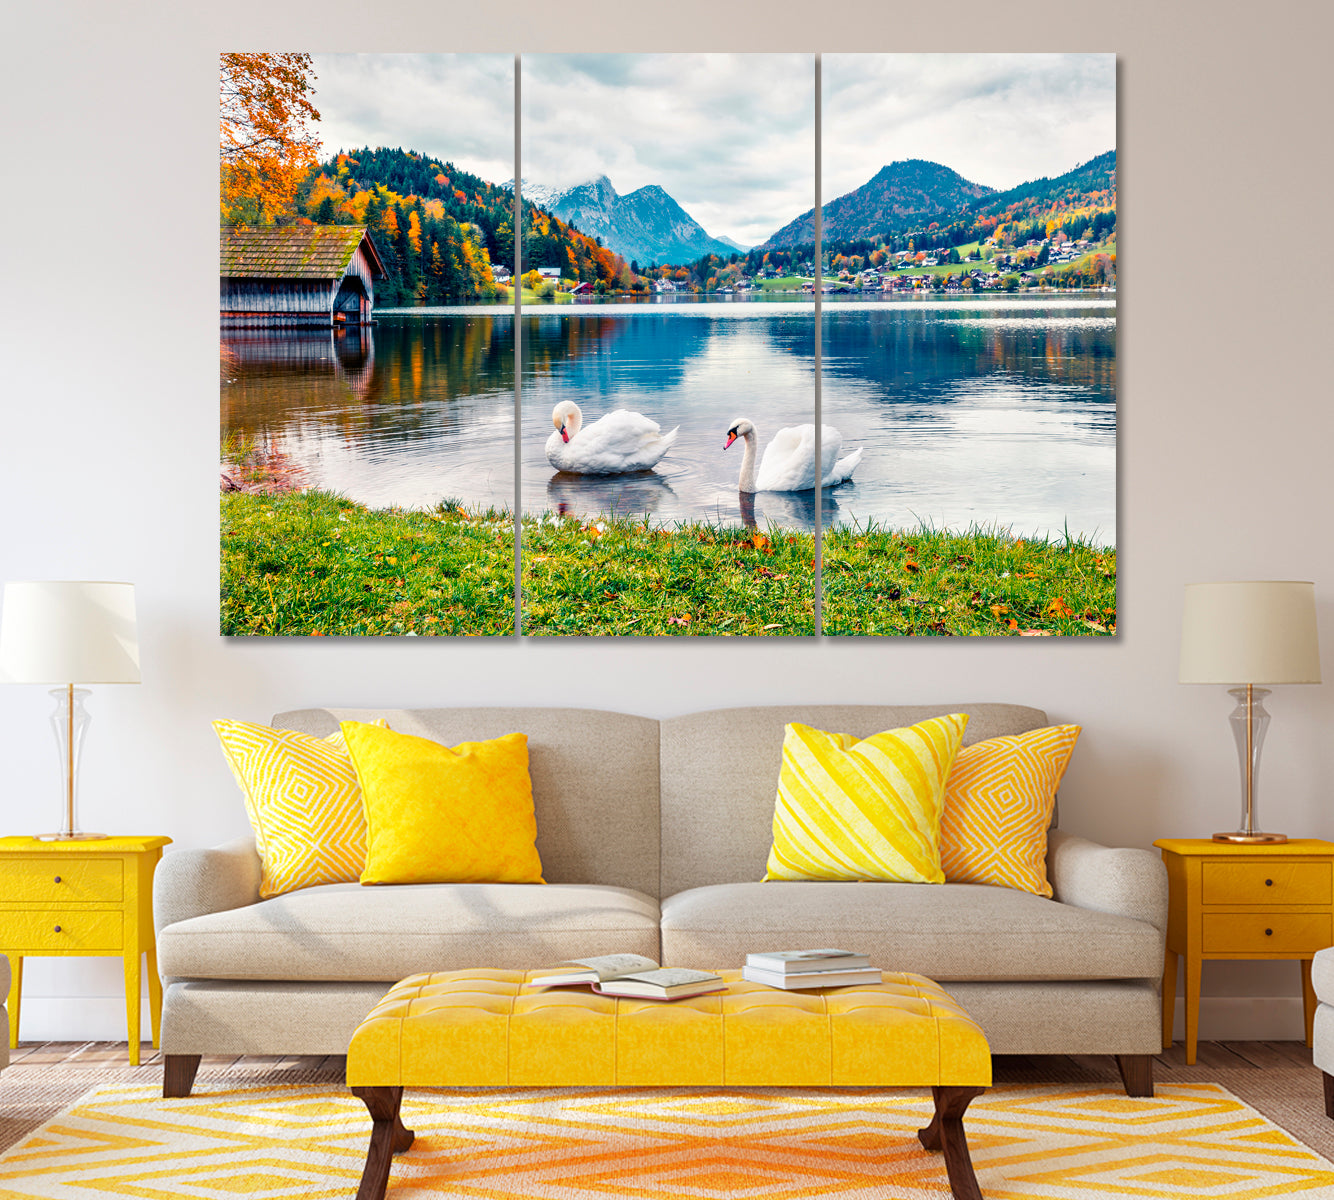 Swans on Grundlsee Lake Alps Canvas Print ArtLexy 3 Panels 36"x24" inches 